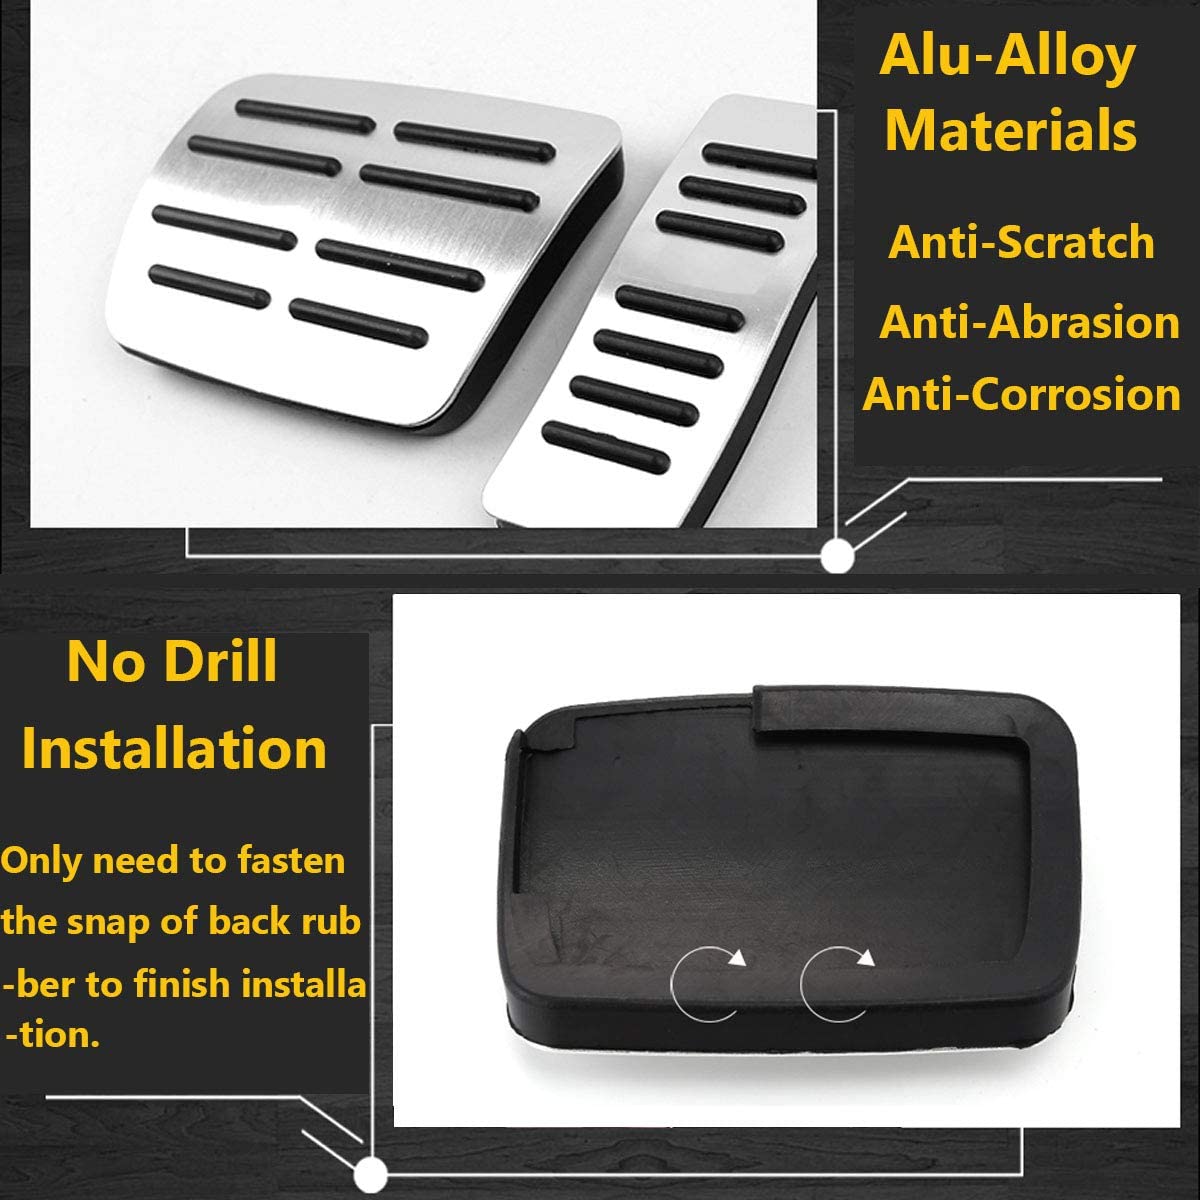 NYZAUTO Anti-Slip Foot Pedal Pads kit Compatible with A4 A5 A6 A7 A8 Q5 and Porsche Macan,at No Drilling Aluminum Brake and Gas Accelerator Pedal Covers